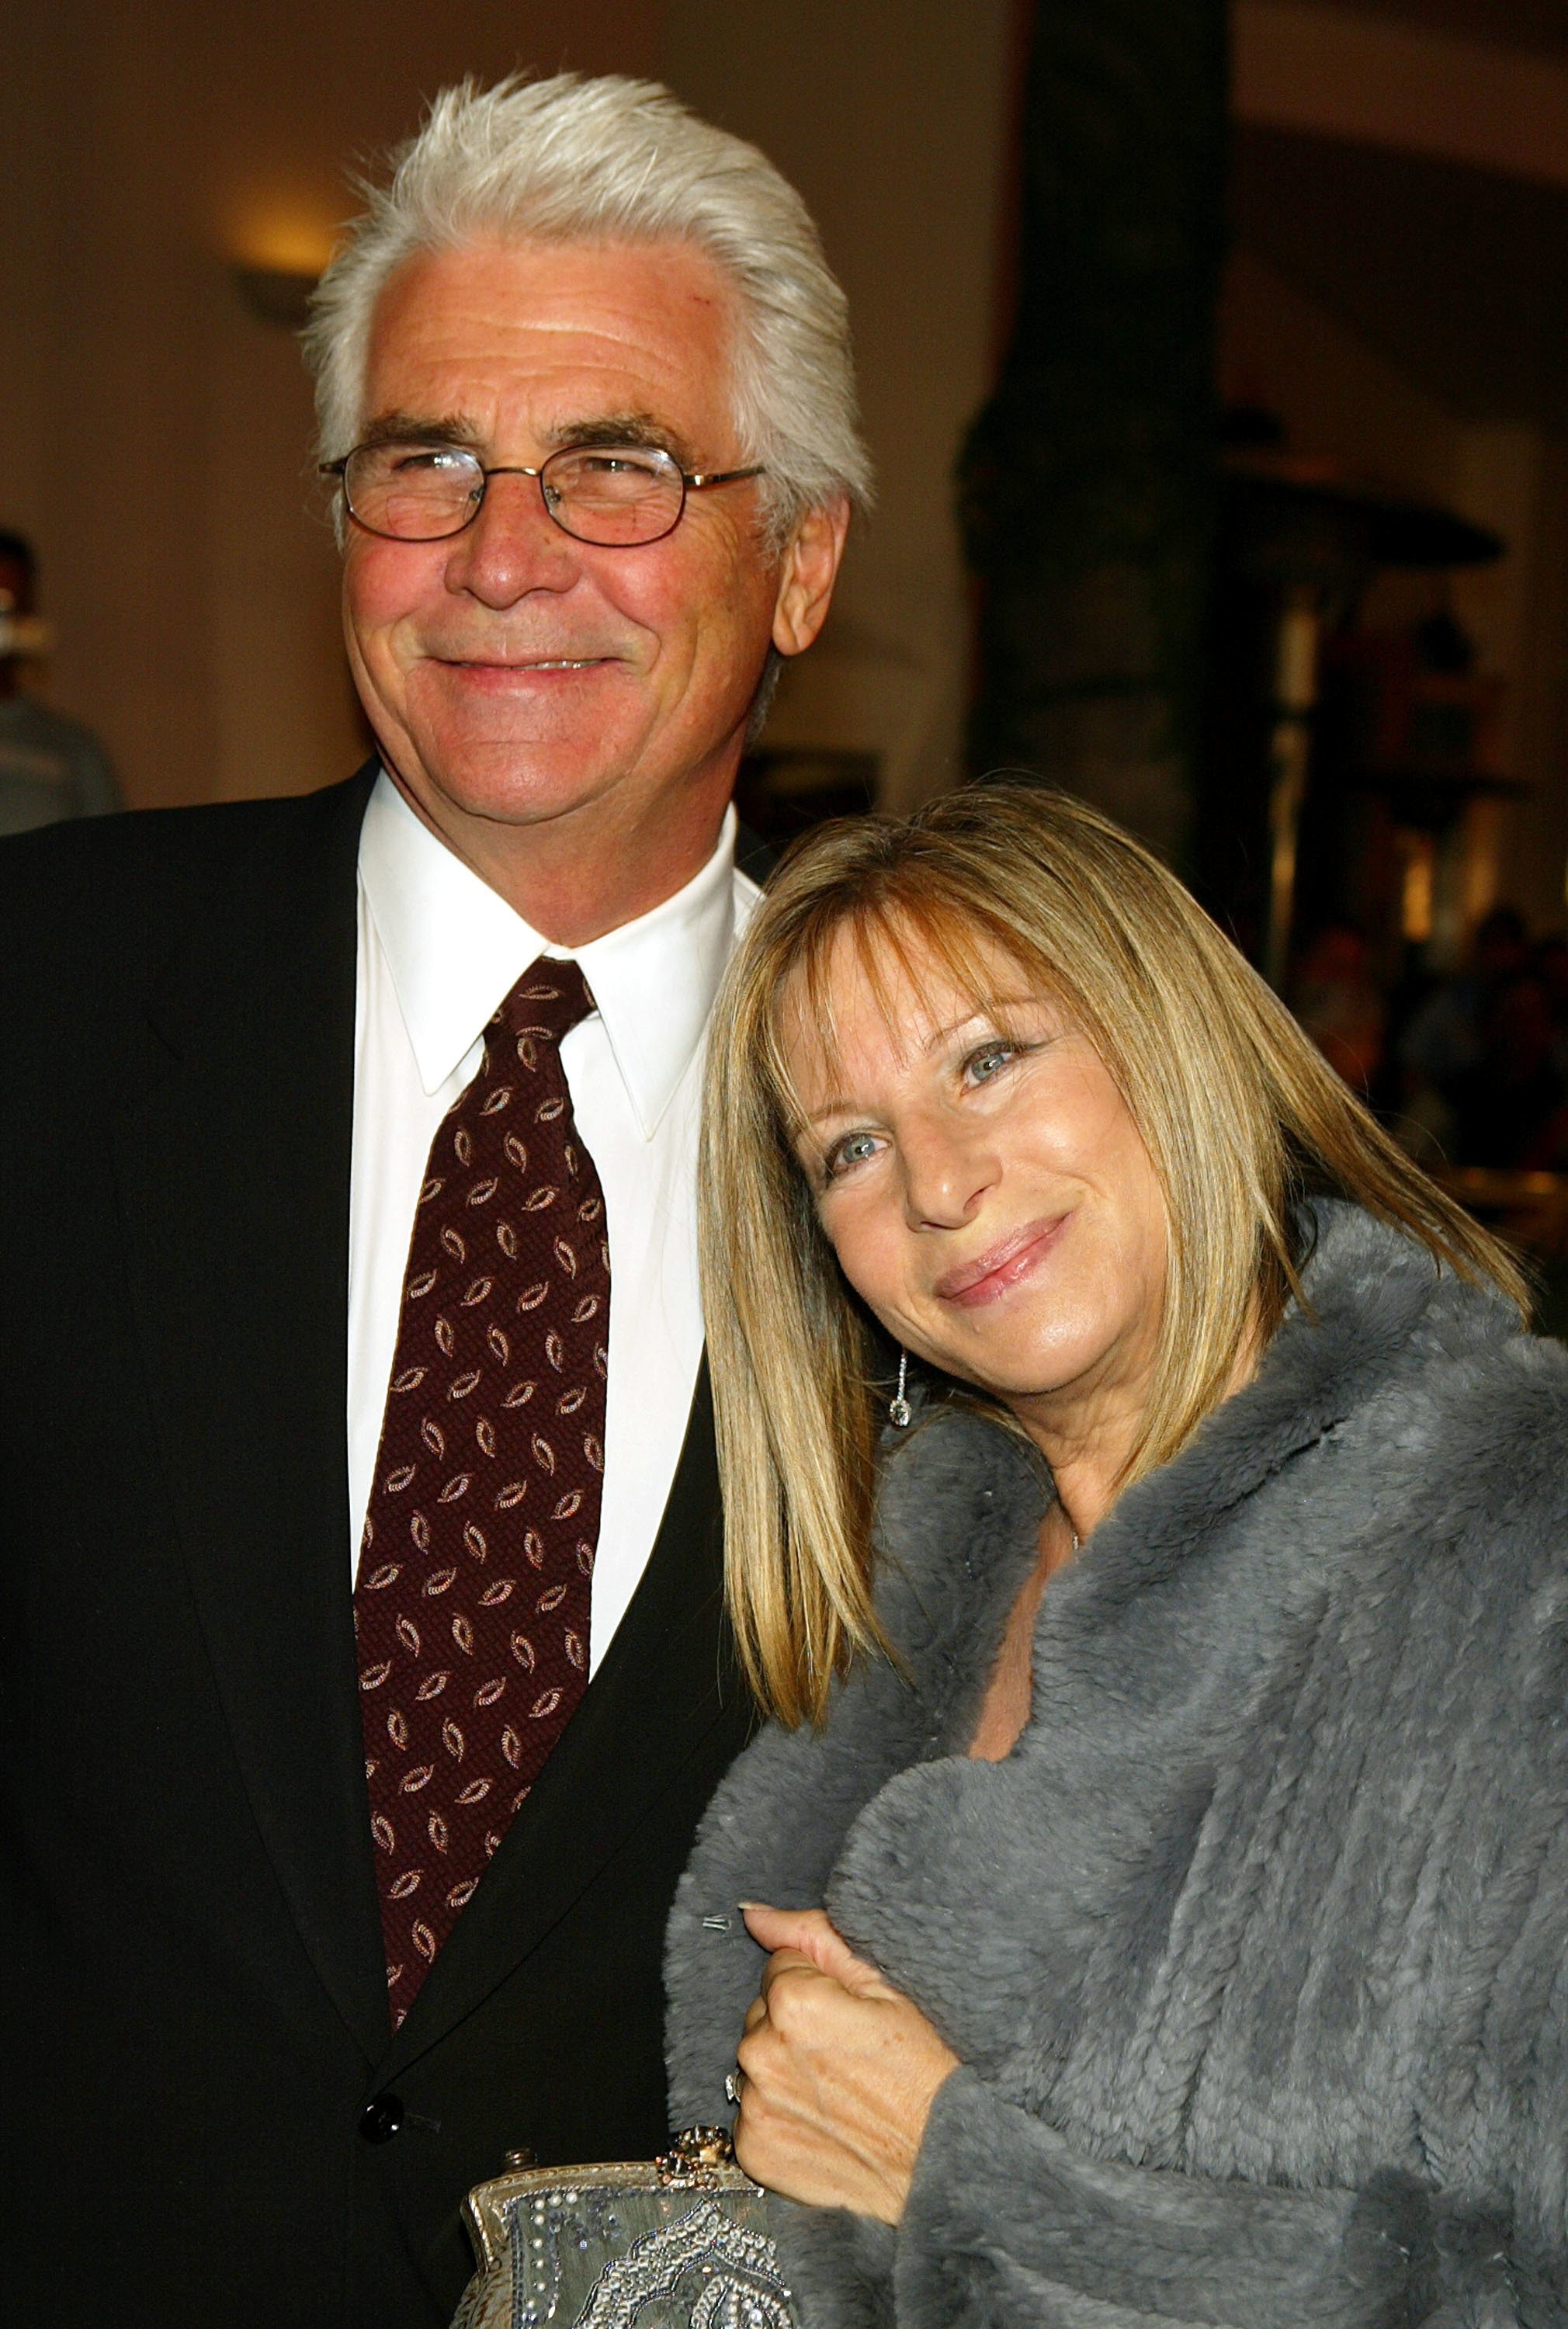 Barbra Streisand and James Brolin at the premiere of "Meet the Fockers" on December 16. 2004. | Source: Getty Images